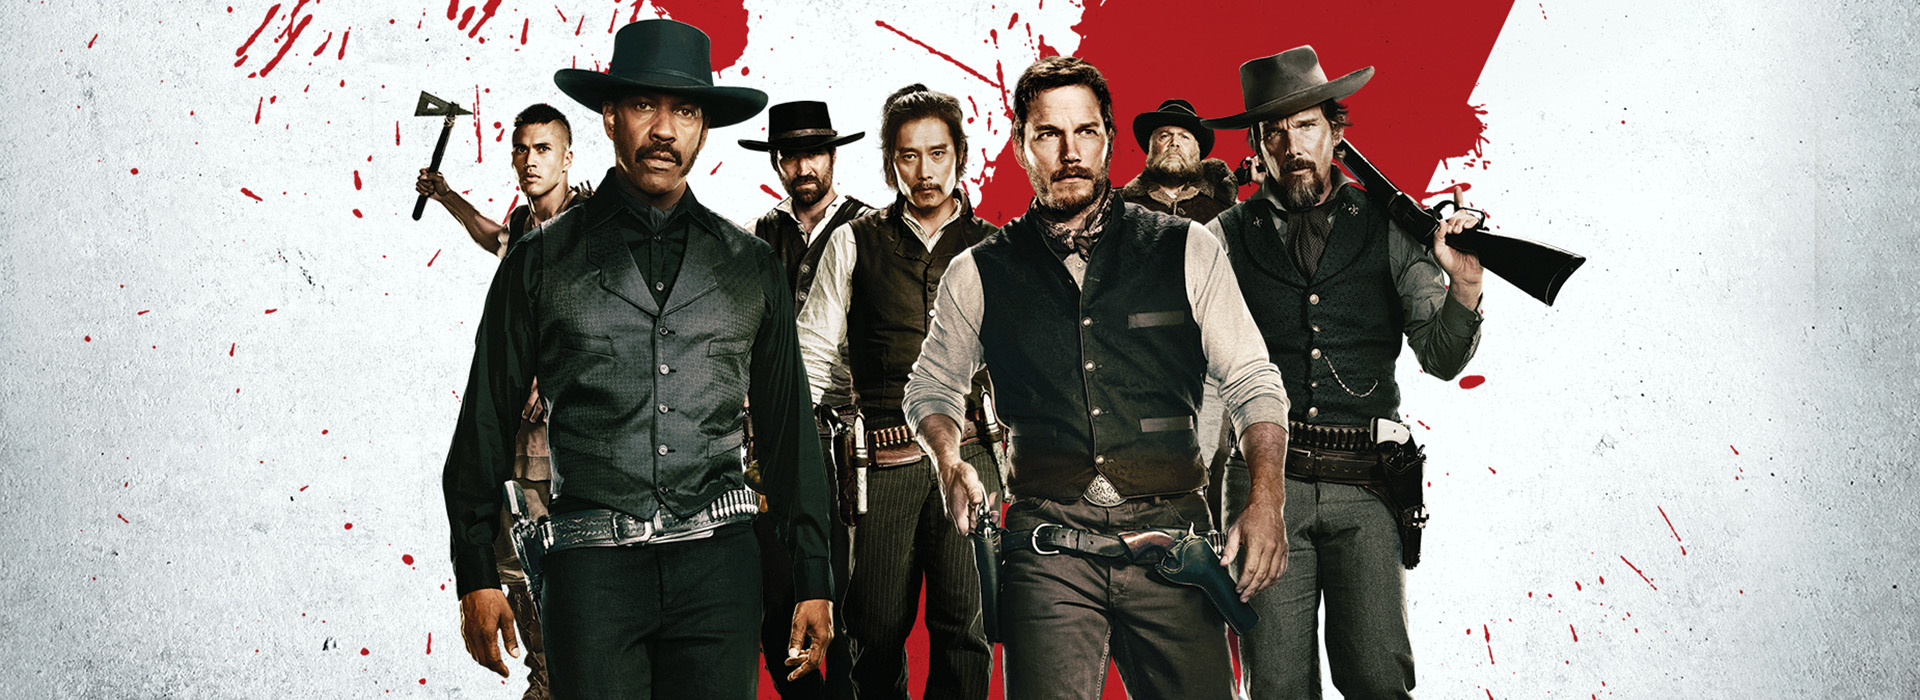 Movie poster The Magnificent Seven